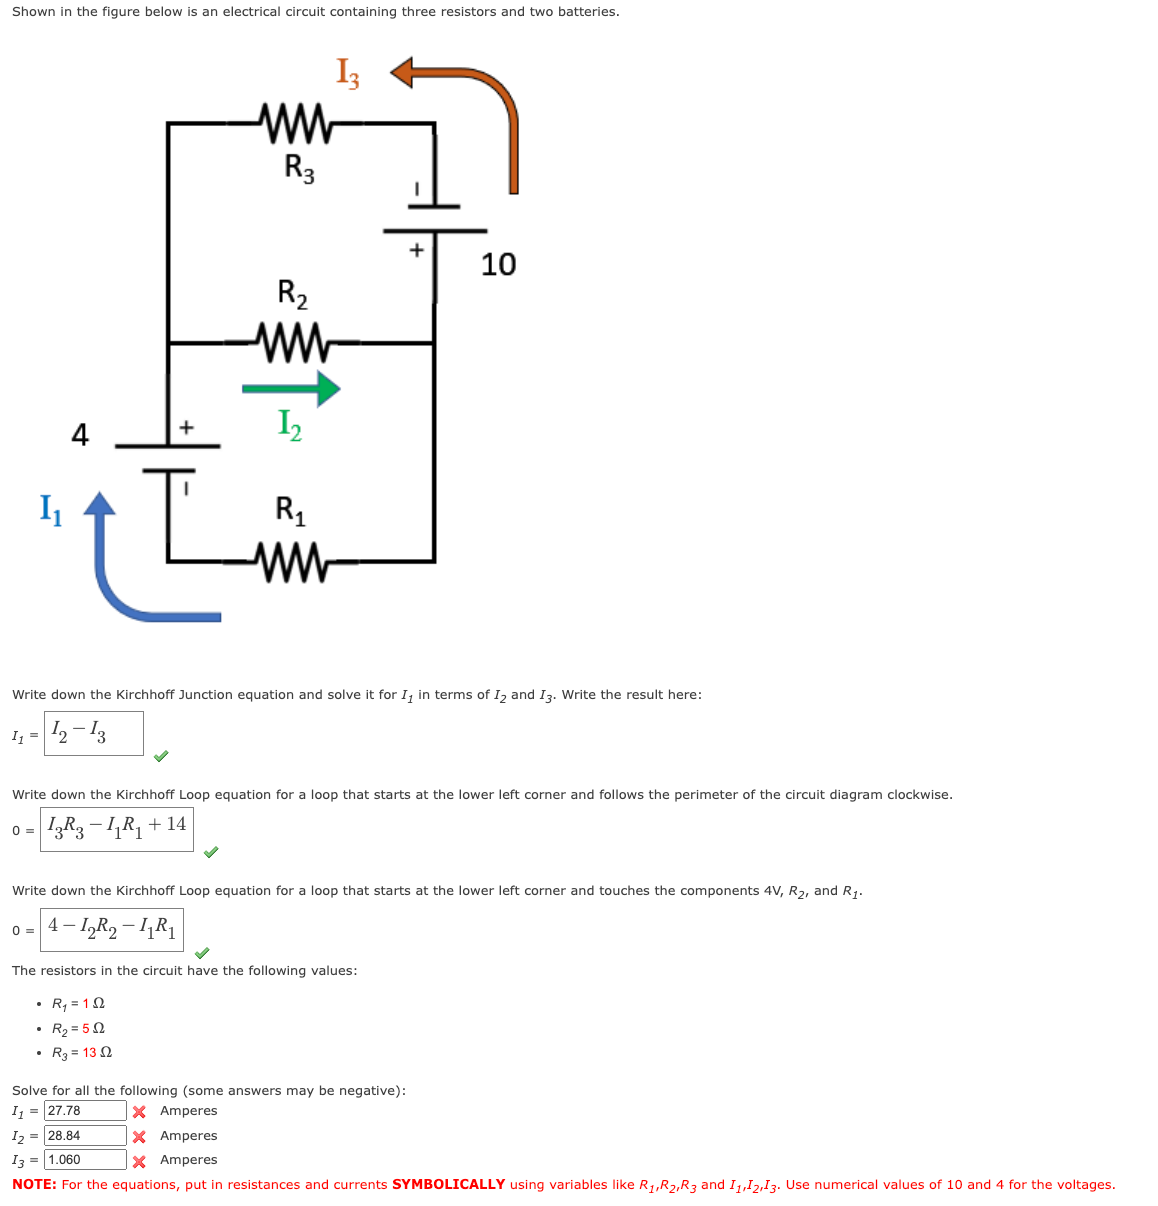 Shown in the figure below is an electrical circuit containing three resistors and two batteries.
I₁
0=
4
+
L
.
ww
R3
R₂
ww
1₂
R₁
ww
Write down the Kirchhoff Junction equation and solve it for I, in terms of I₂ and I3. Write the result here:
1₁ = 12-13
R₂=552
R₂ = 132
13
Write down the Kirchhoff Loop equation for a loop that starts at the lower left corner and follows the perimeter of the circuit diagram clockwise.
- IzR3 − LR₁ + 14
+ 10
Write down the Kirchhoff Loop equation for a loop that starts at the lower left corner and touches the components 4V, R₂, and R₁.
0 = 4-1₂R₂-11R₁
The resistors in the circuit have the following values:
R₁ = 12
Solve for all the following (some answers may be negative):
I₁ = 27.78
X Amperes
1₂ = 28.84
X Amperes
13 = 1.060
X Amperes
NOTE: For the equations, put in resistances and currents SYMBOLICALLY using variables like R₁,R₂,R3 and 11,12,13. Use numerical values of 10 and 4 for the voltages.